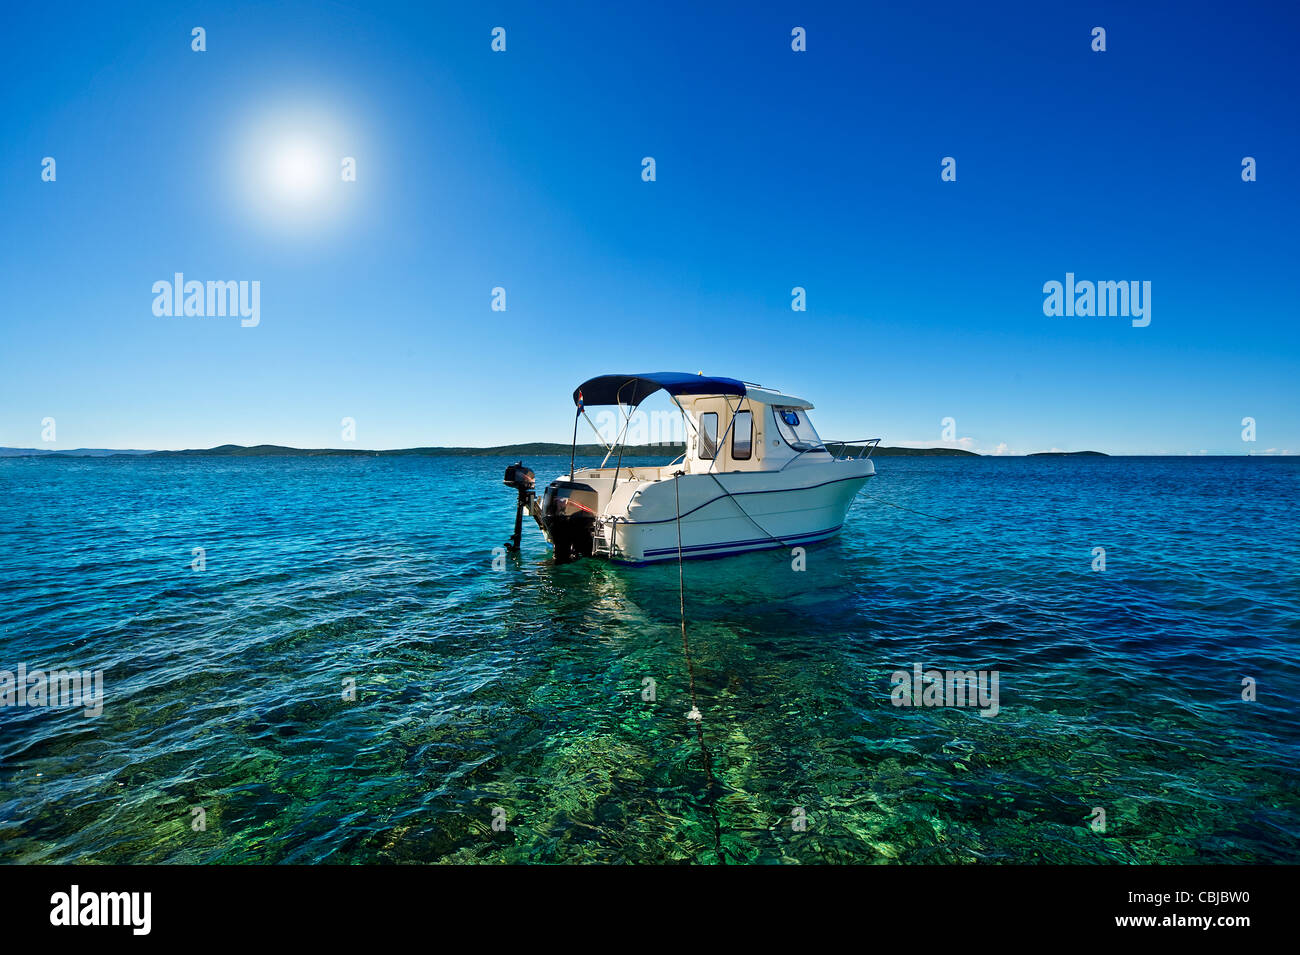 landscape of lonely boat on adriatic sea Stock Photo